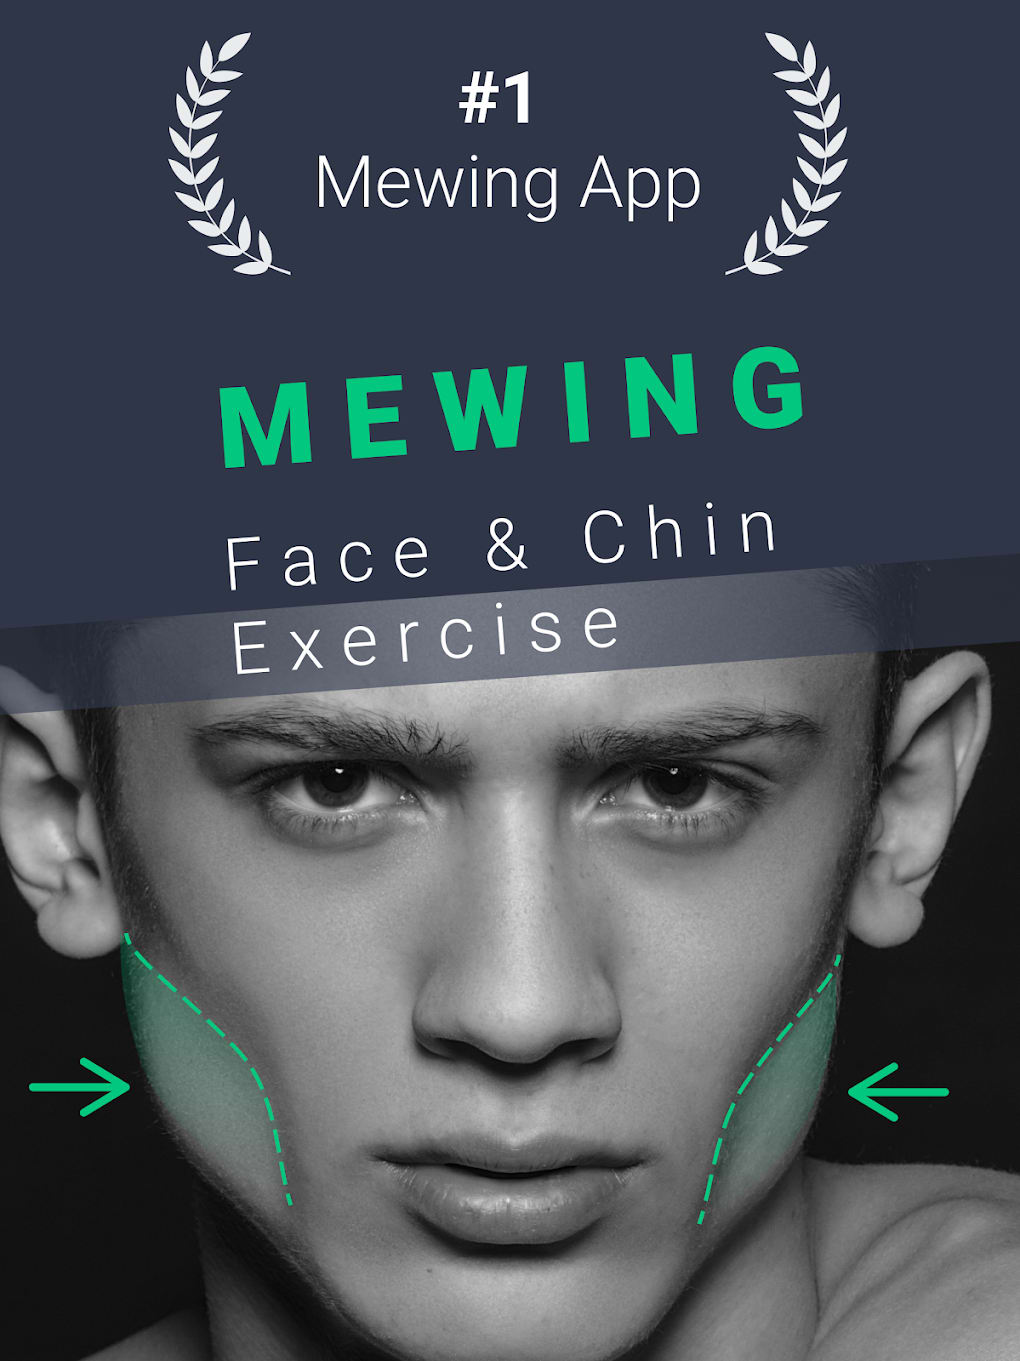 Mewing Face Exercise For Jawline Chin Posture Screenshot 